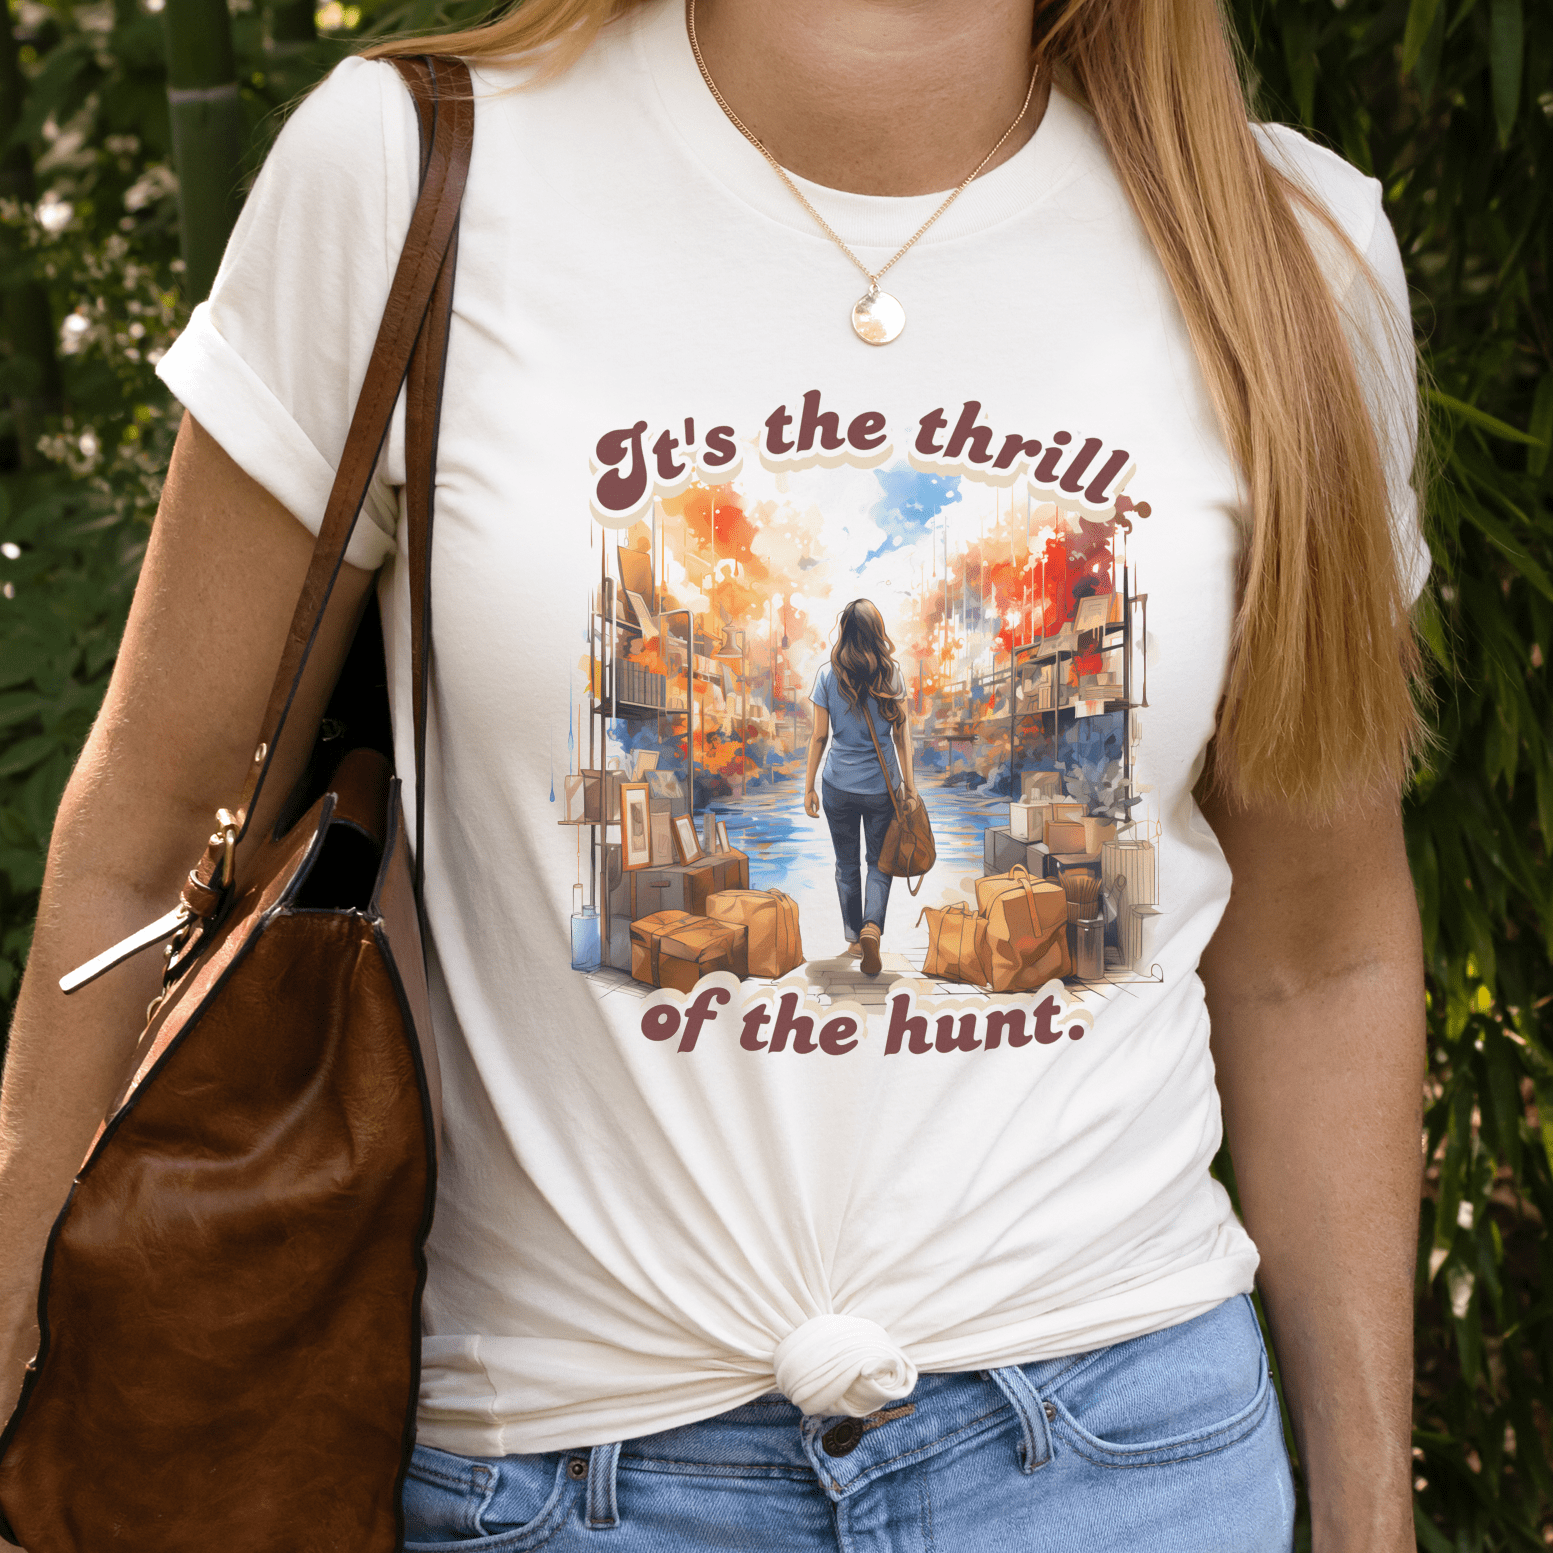 It's the thrill of the hunt | tee for thrifting, thrifting teeshirts, gifts for thrifting | Unisex t-shirt